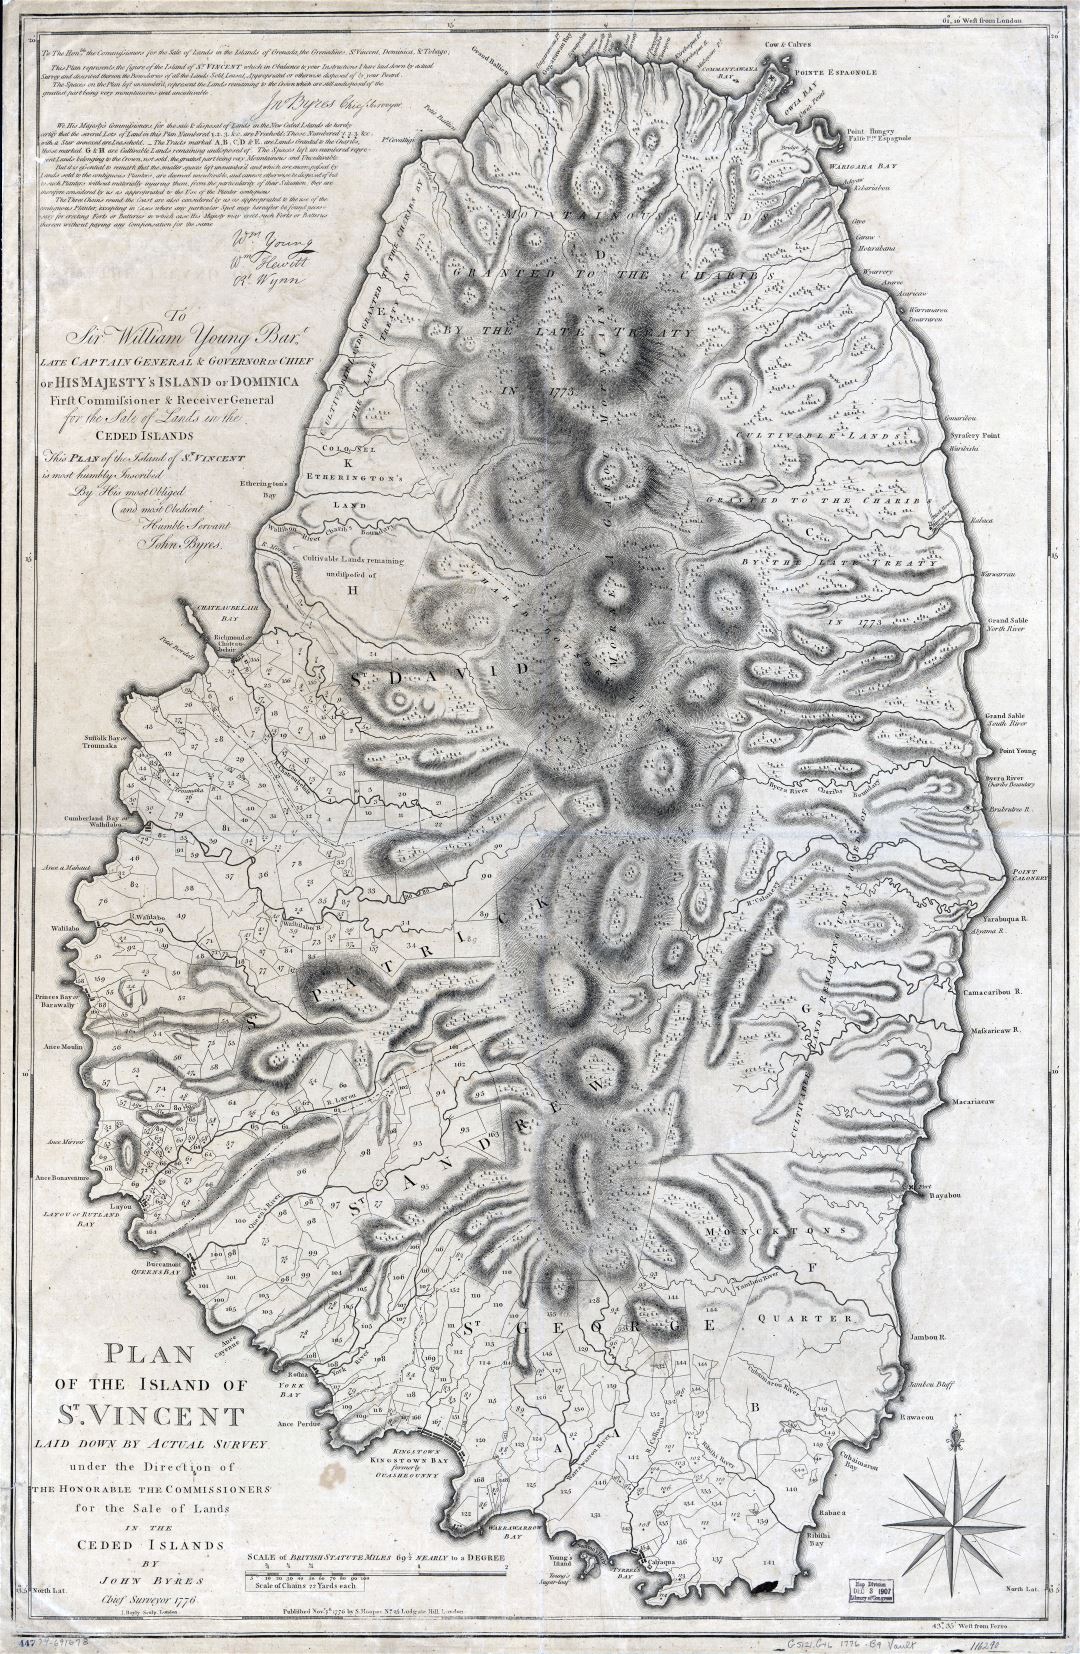 Large scale detailed old plan of the Island of St. Vincent - 1776